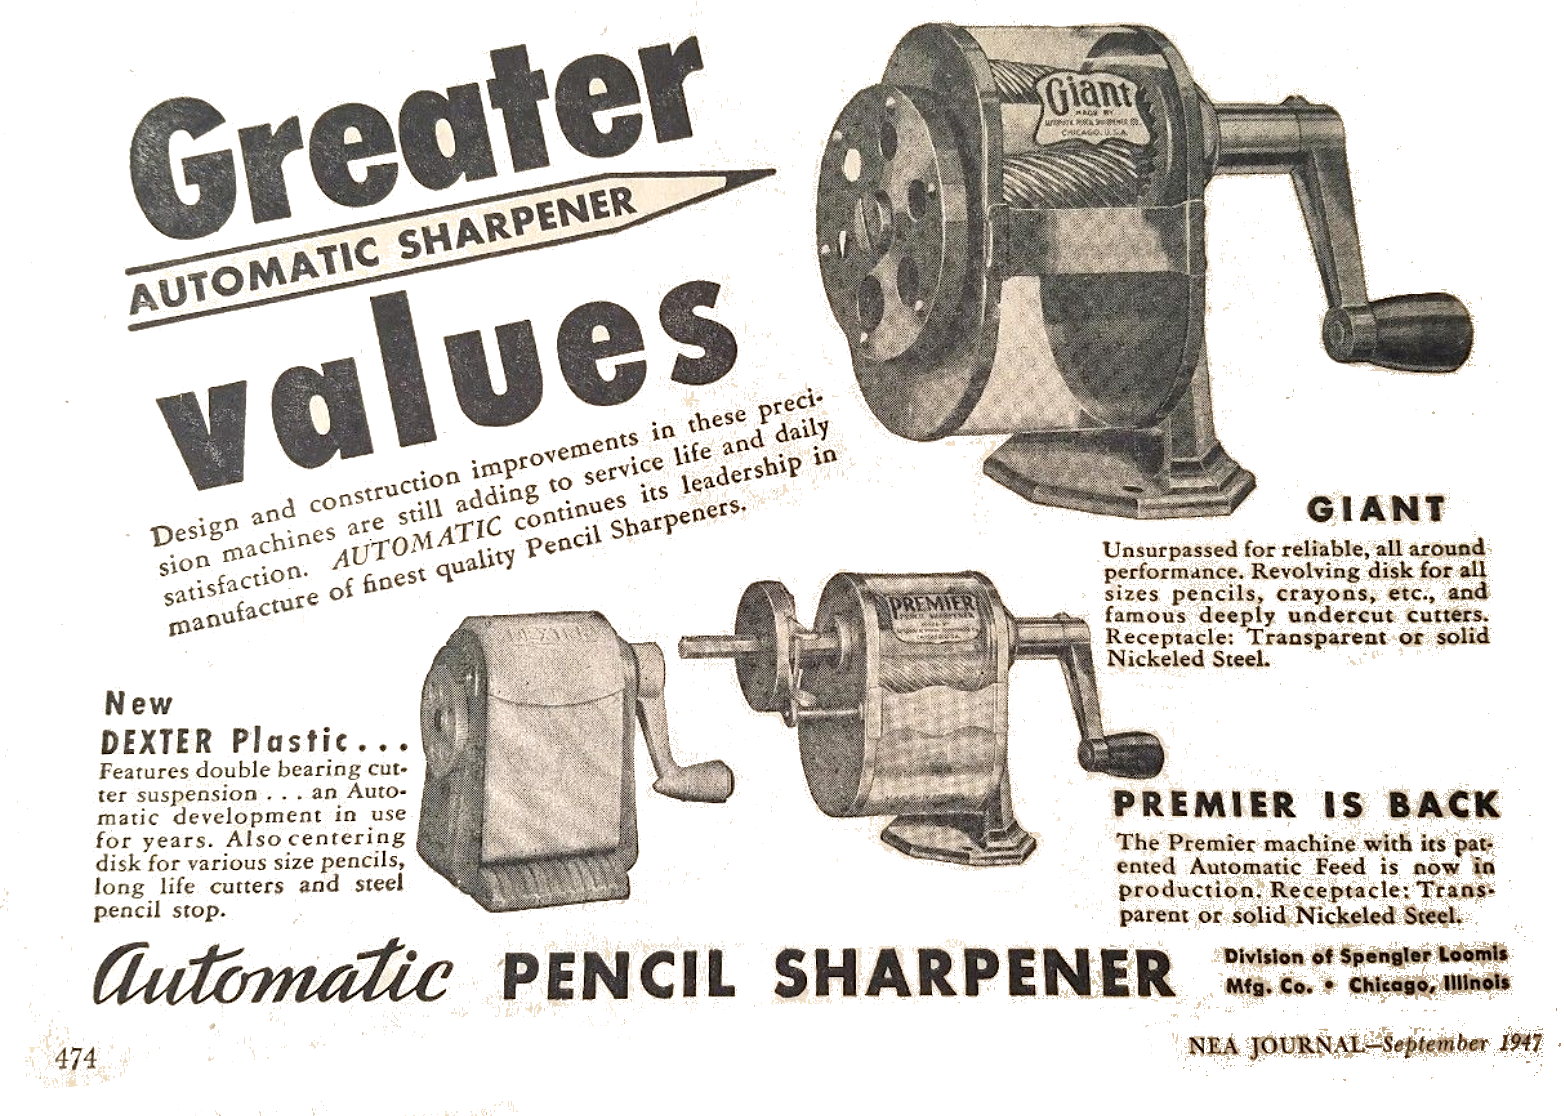 History of Pencil Sharpener - Facts and Types